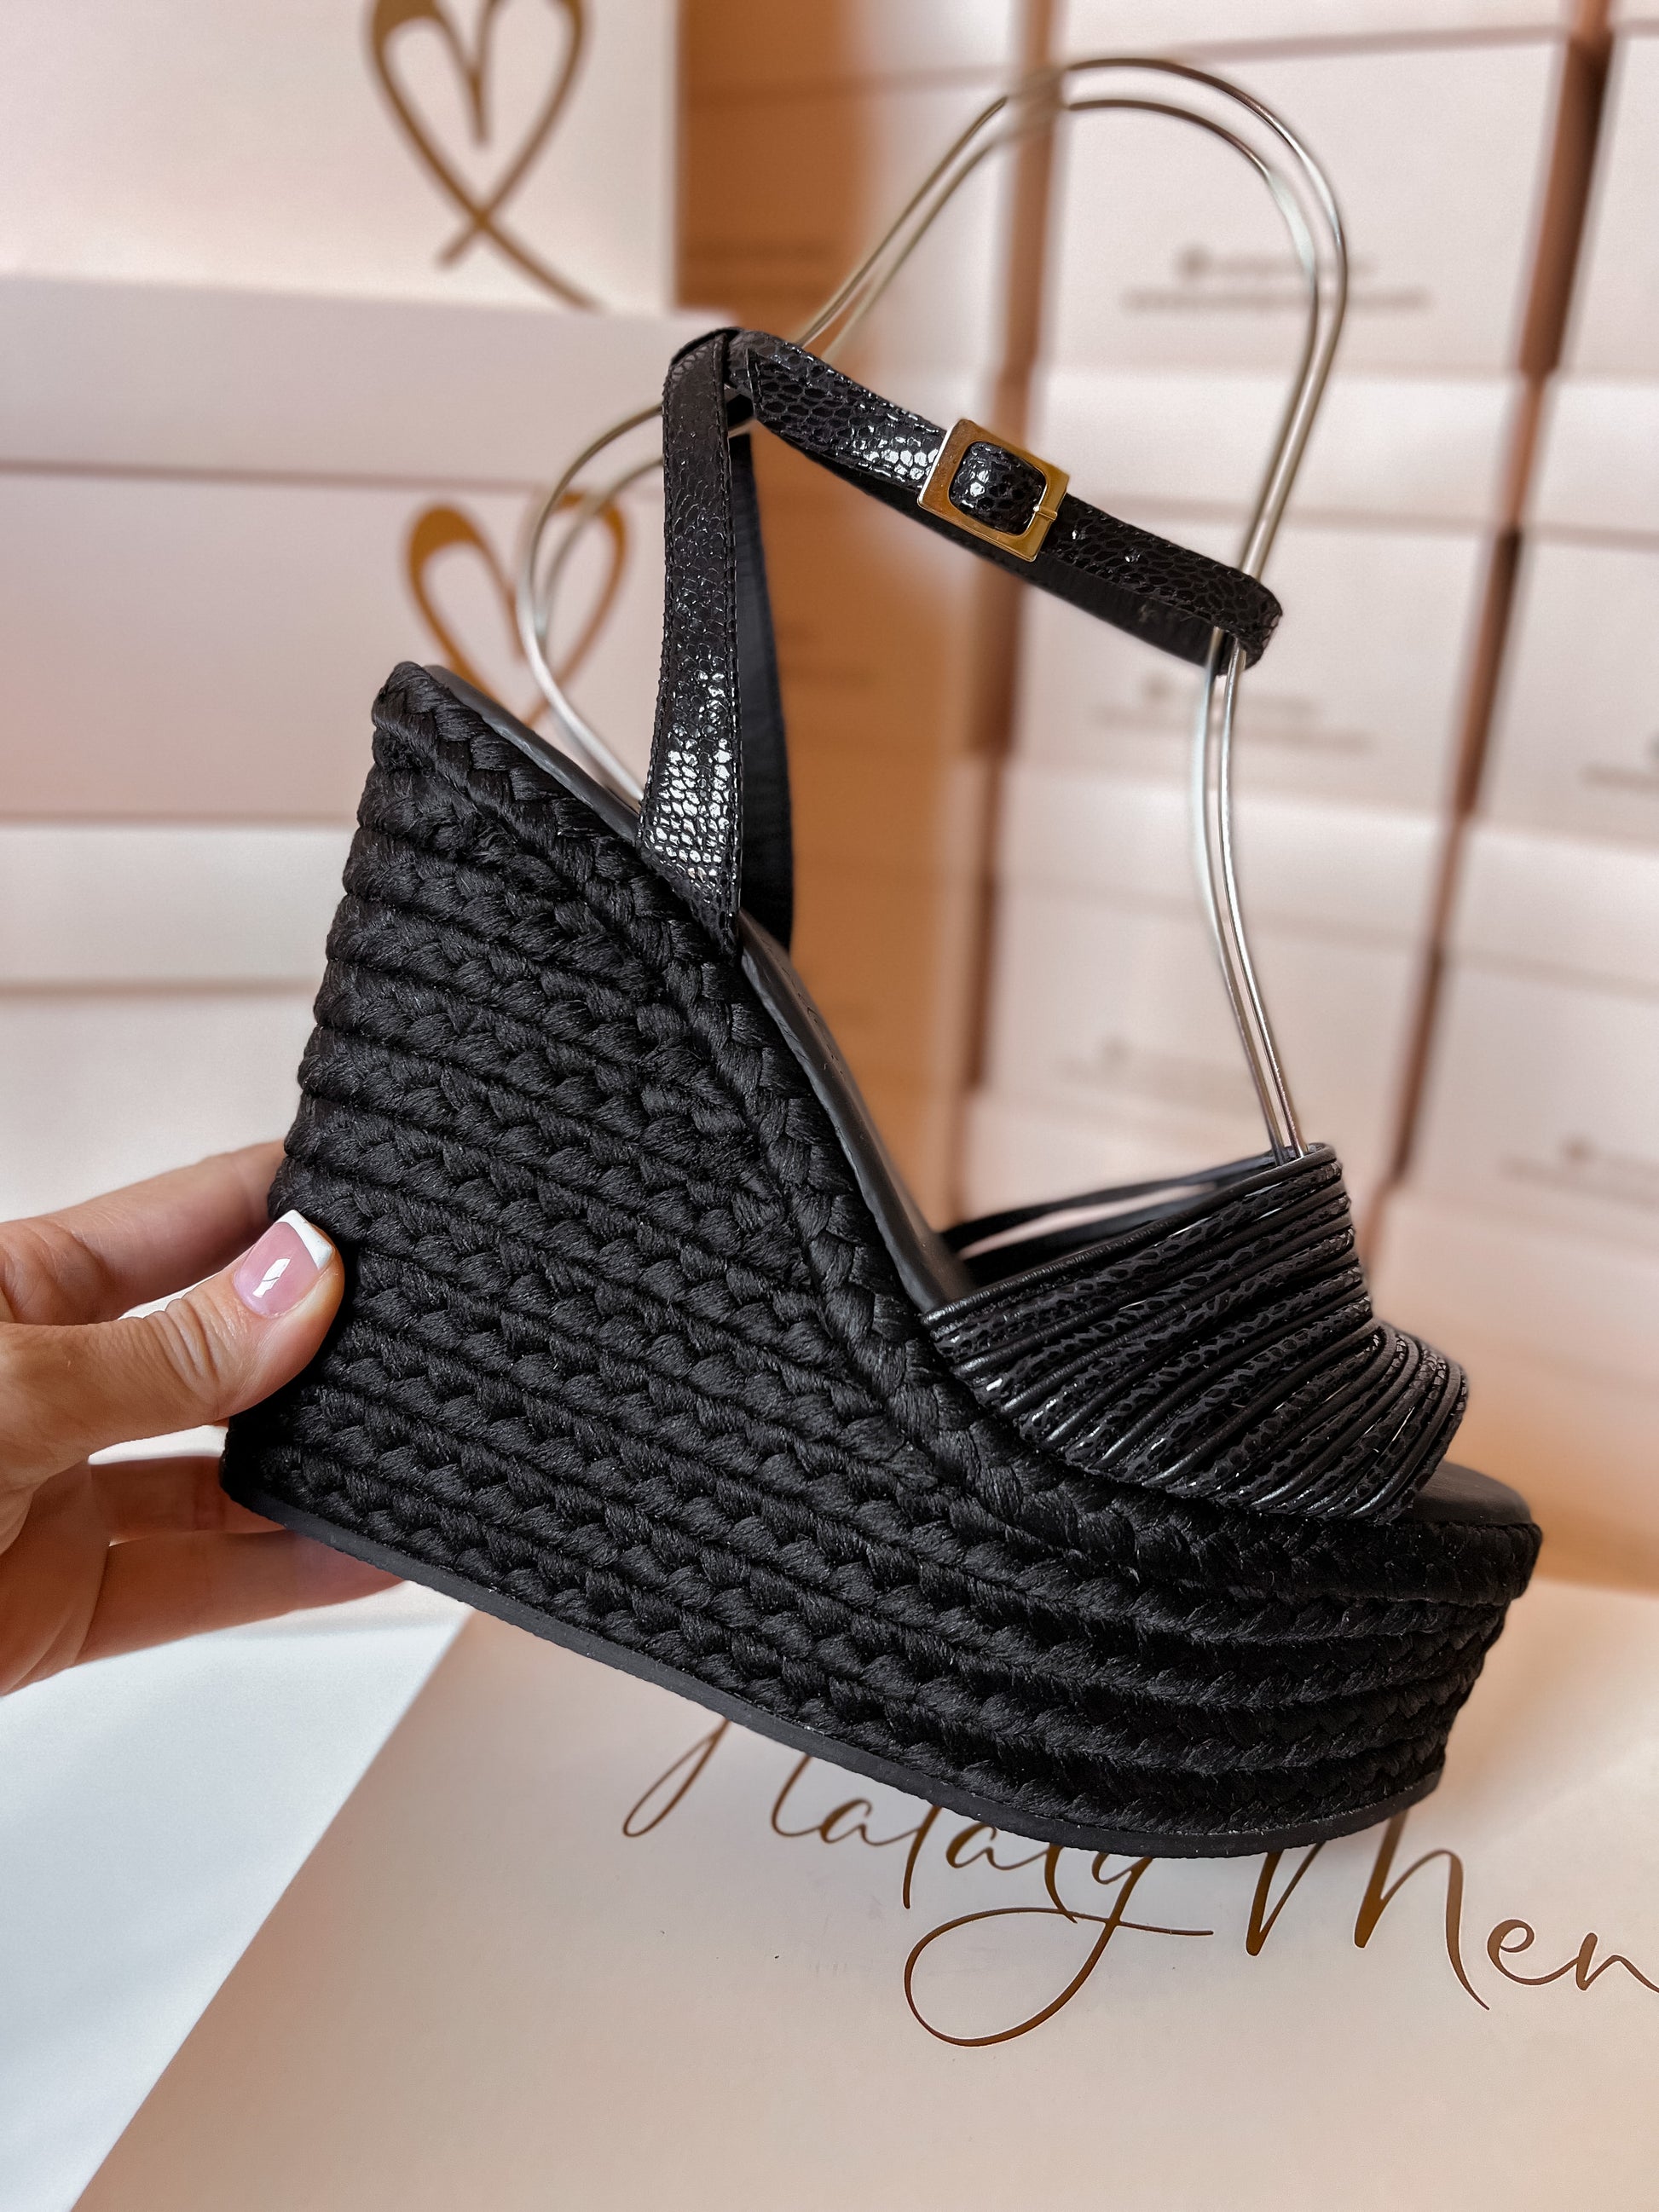 Holly Black Espadrilles by Nataly Mendez Upper material genuine leather Genuine leather insole lining Flexible rubber sole Handmade 5.5 inch high heel 2.5 inch platform